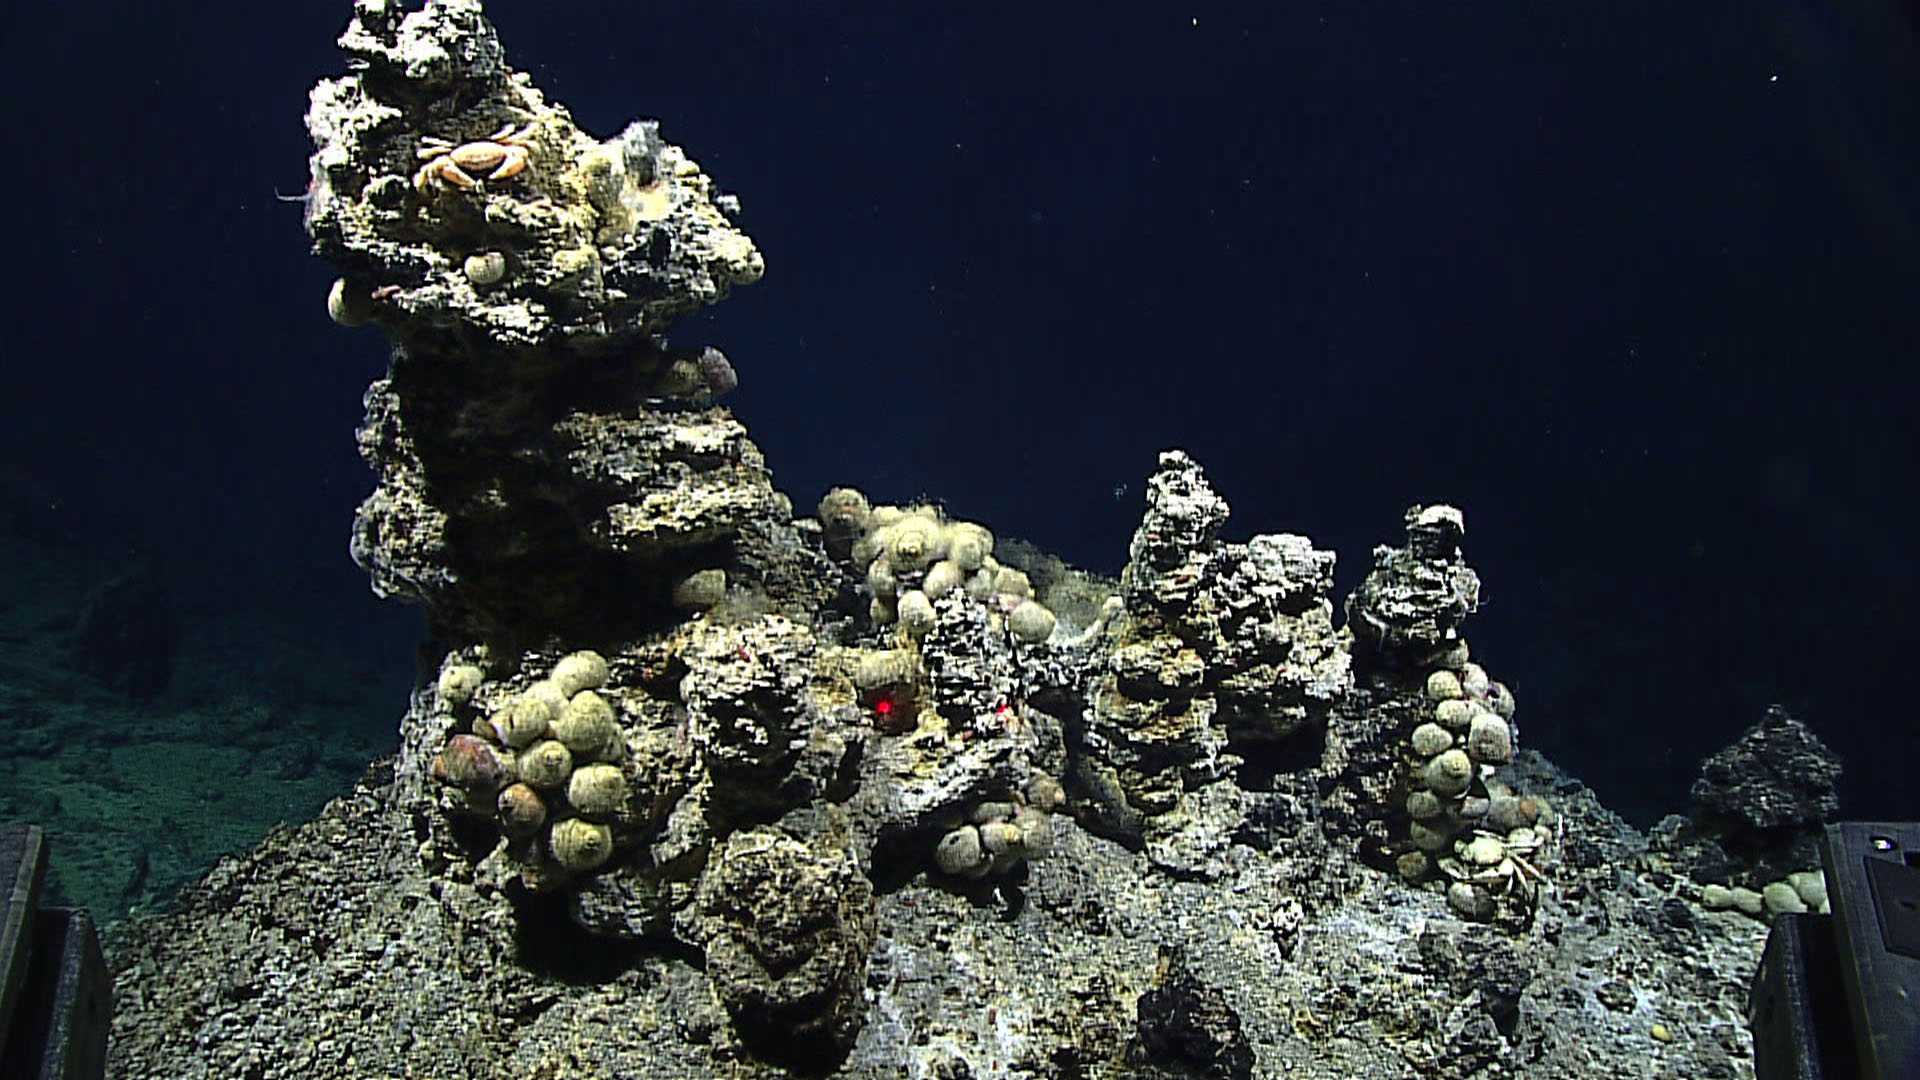 Life on a Hydrothermal Vent